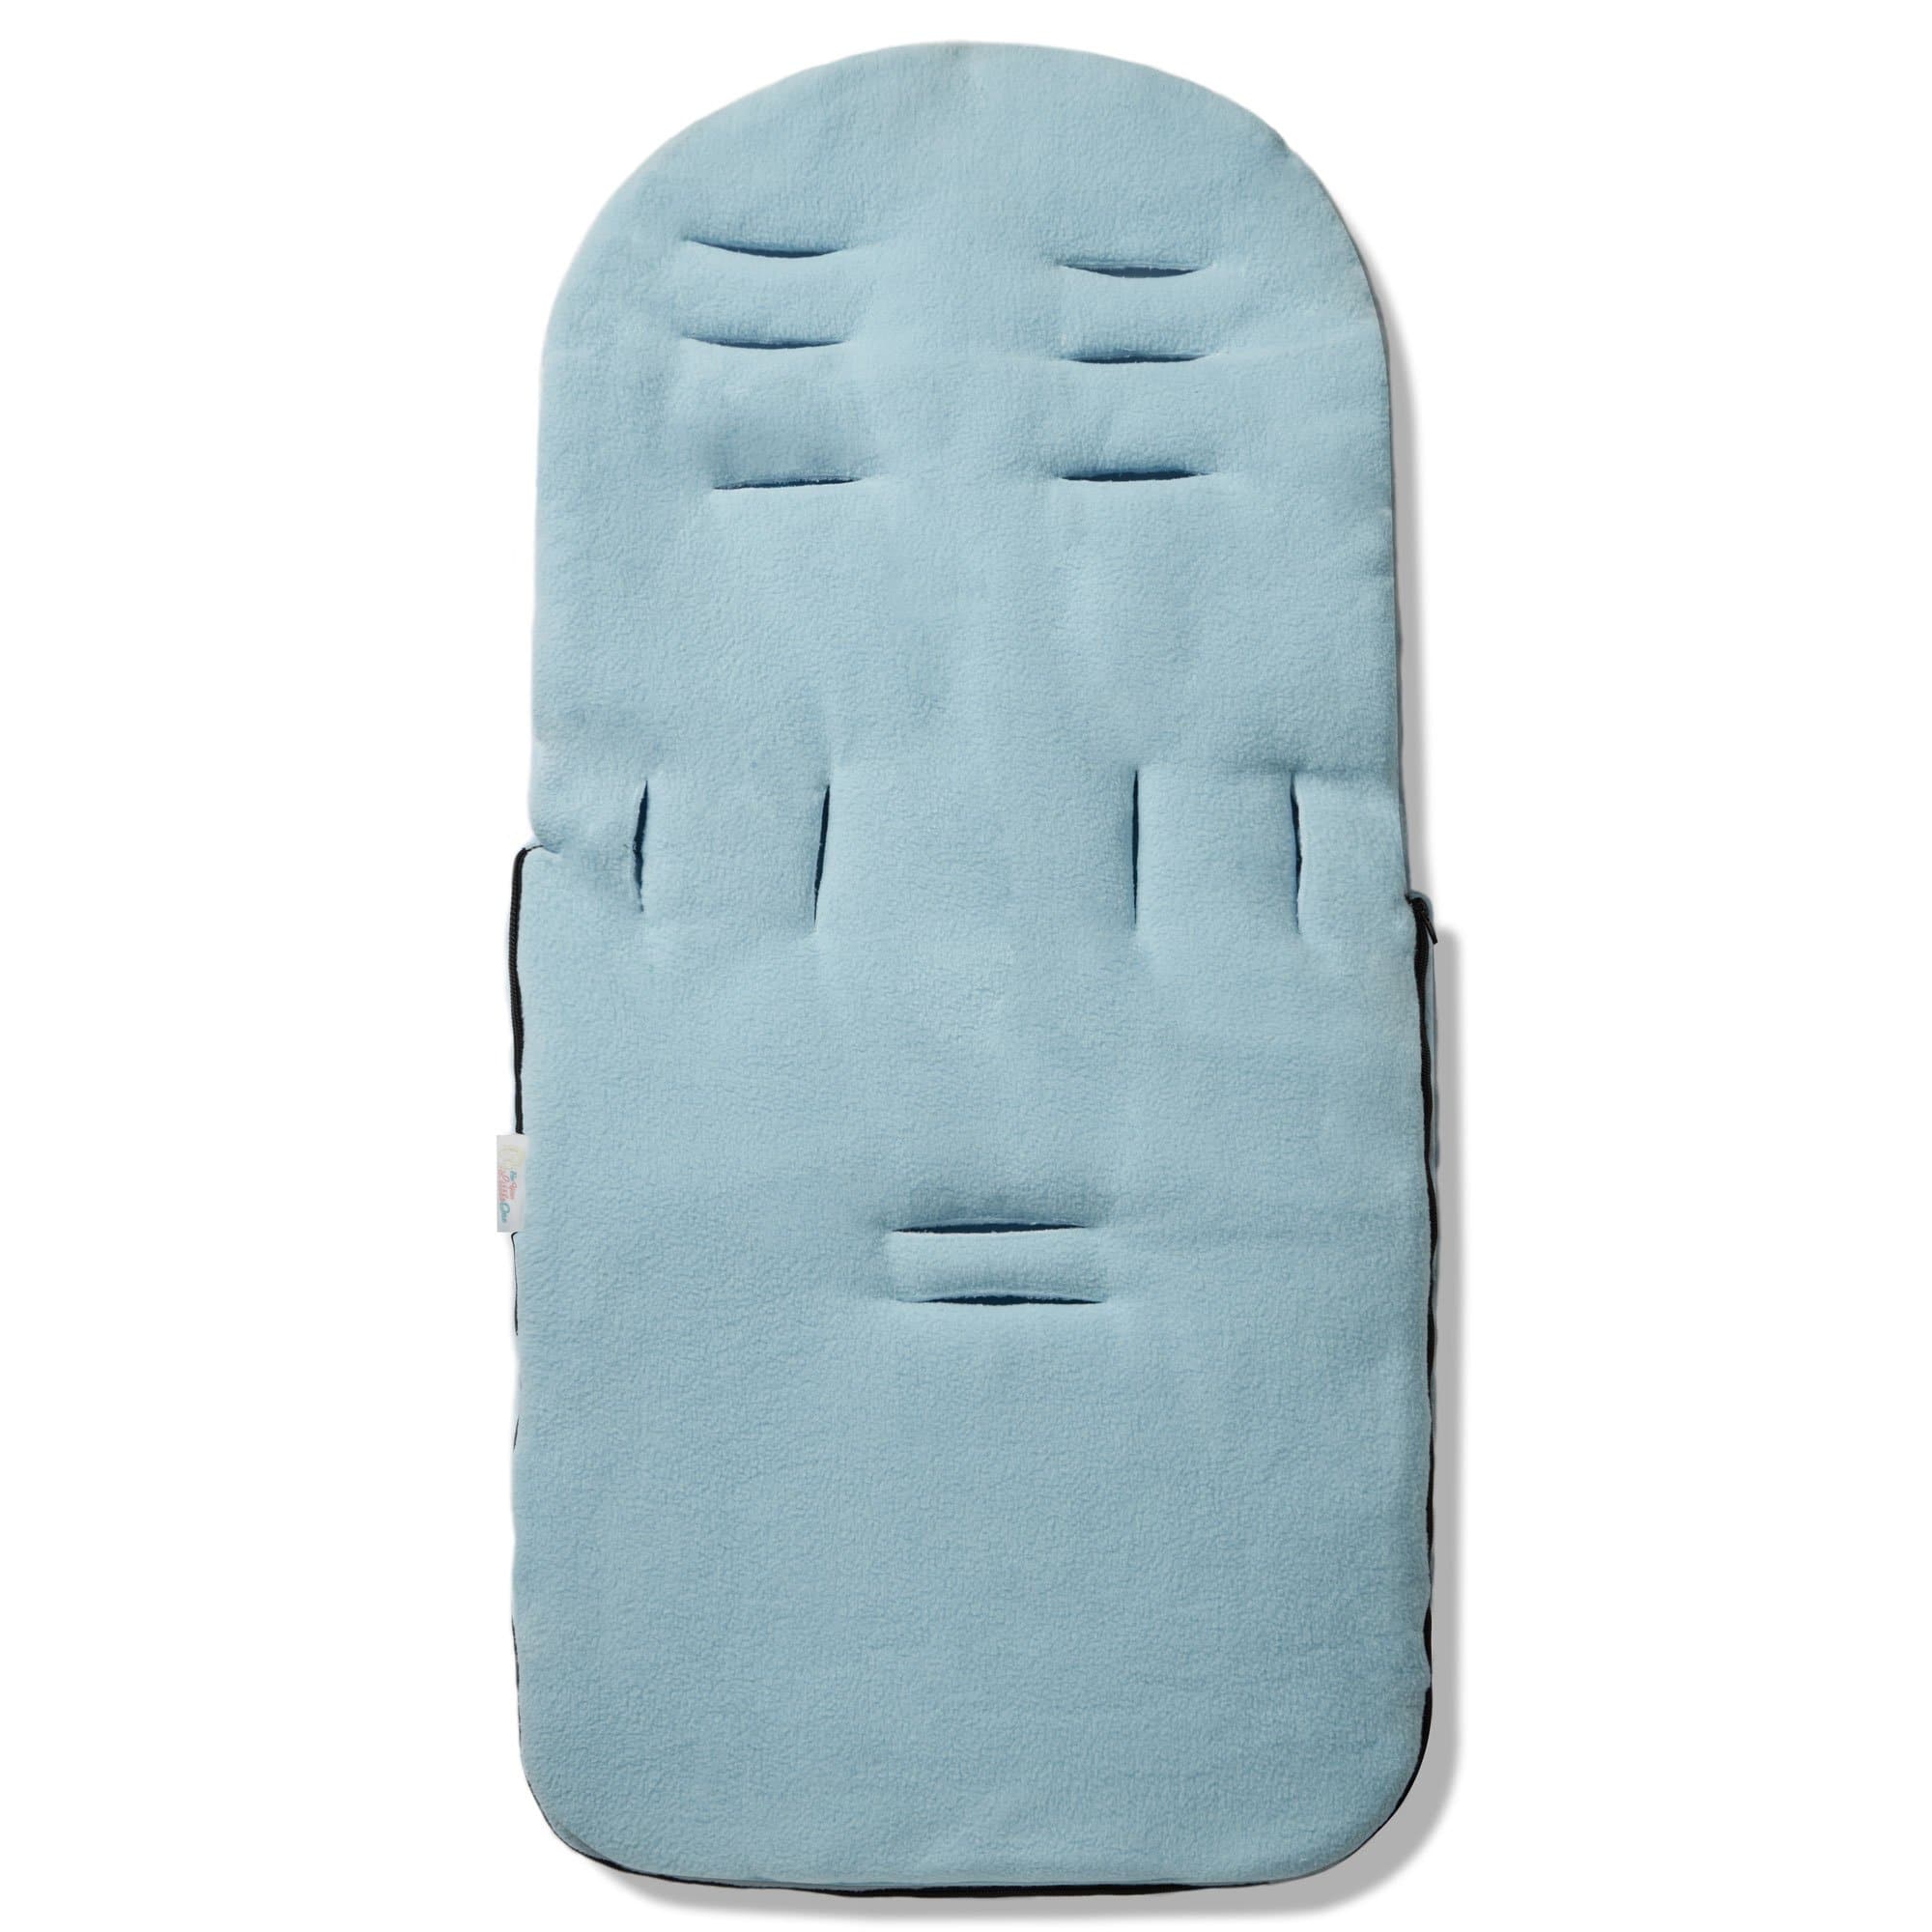 Dimple Footmuff / Cosy Toes Compatible with BabySun - For Your Little One